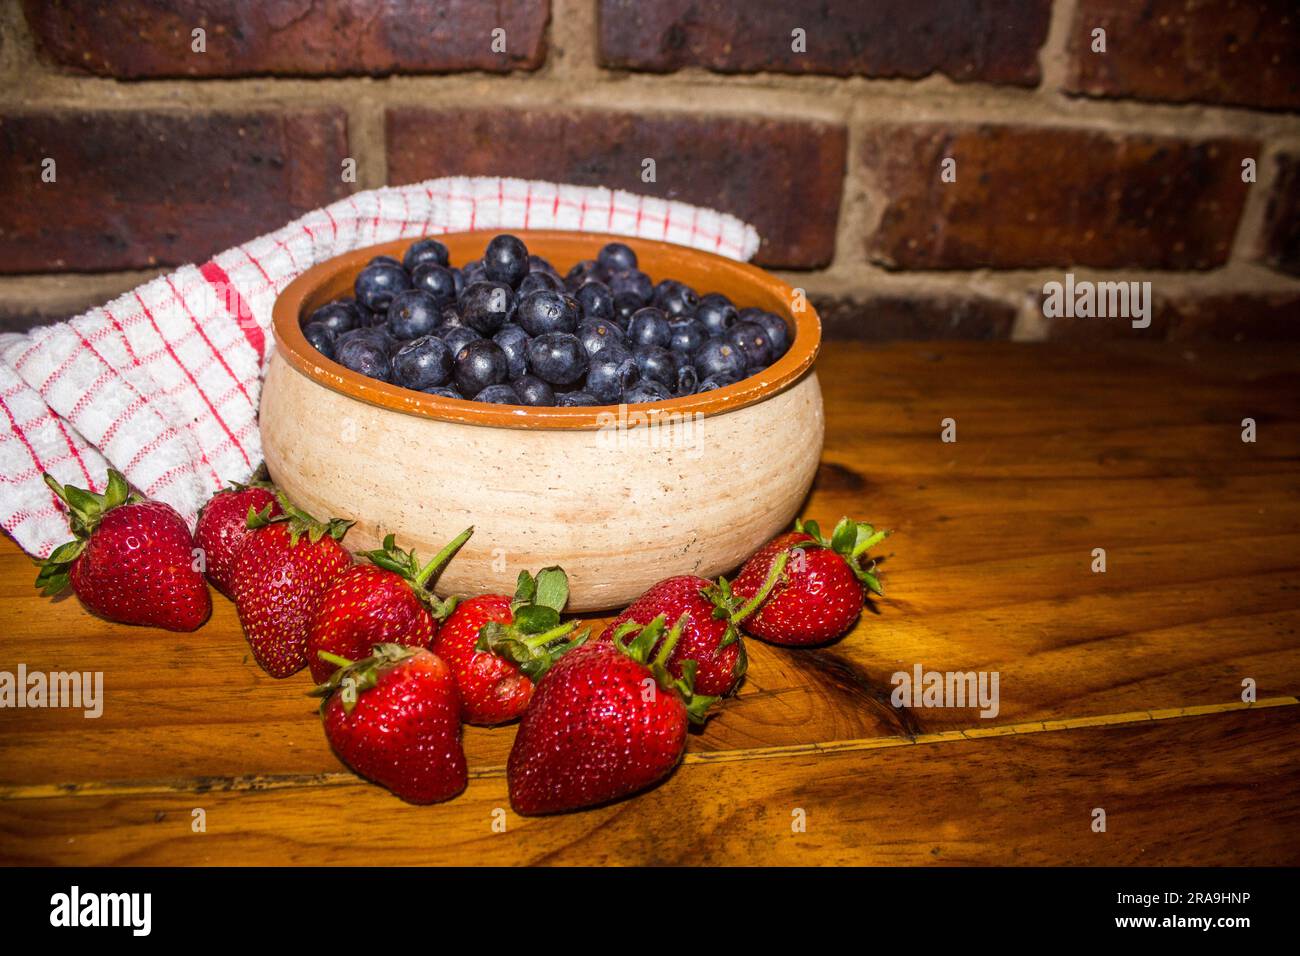 Bowl of Blueberries surrounded by ripe strawberries Stock Photo